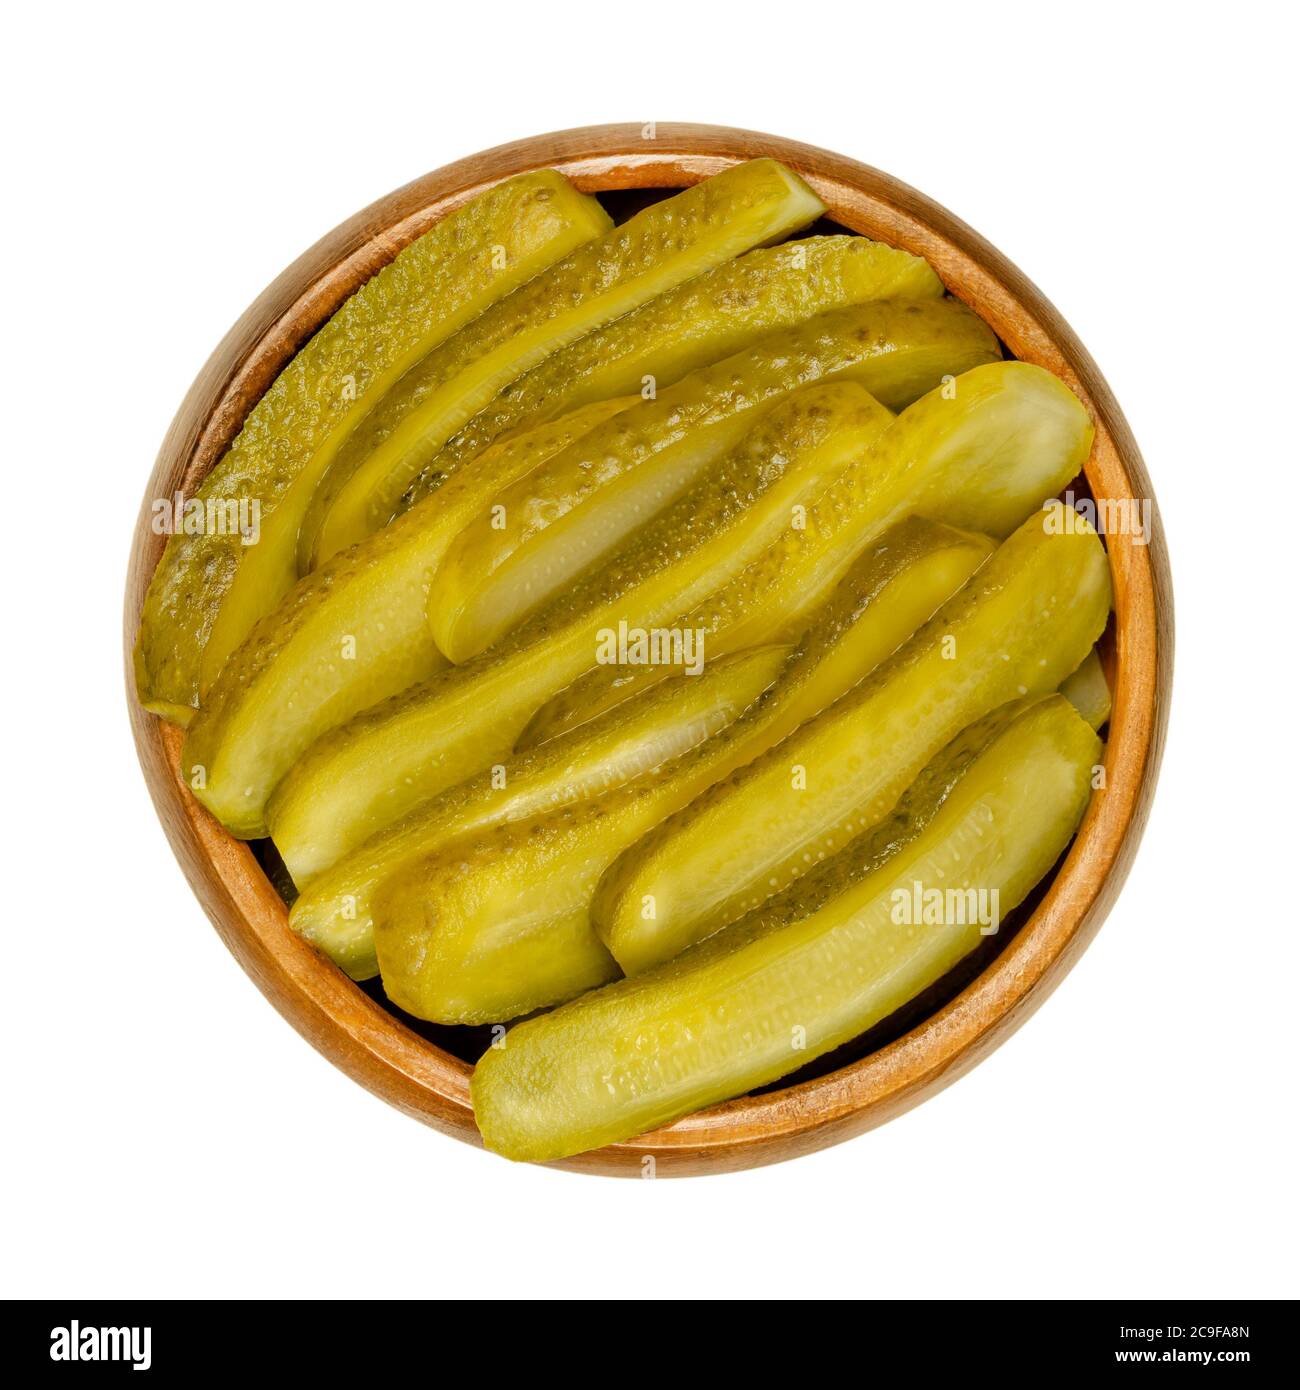 Sliced pickled cucumbers, also known as pickle or gherkin, in a wooden bowl. Small pickled cucumbers with bumpy skin, sliced lengthways. Baby pickles. Stock Photo